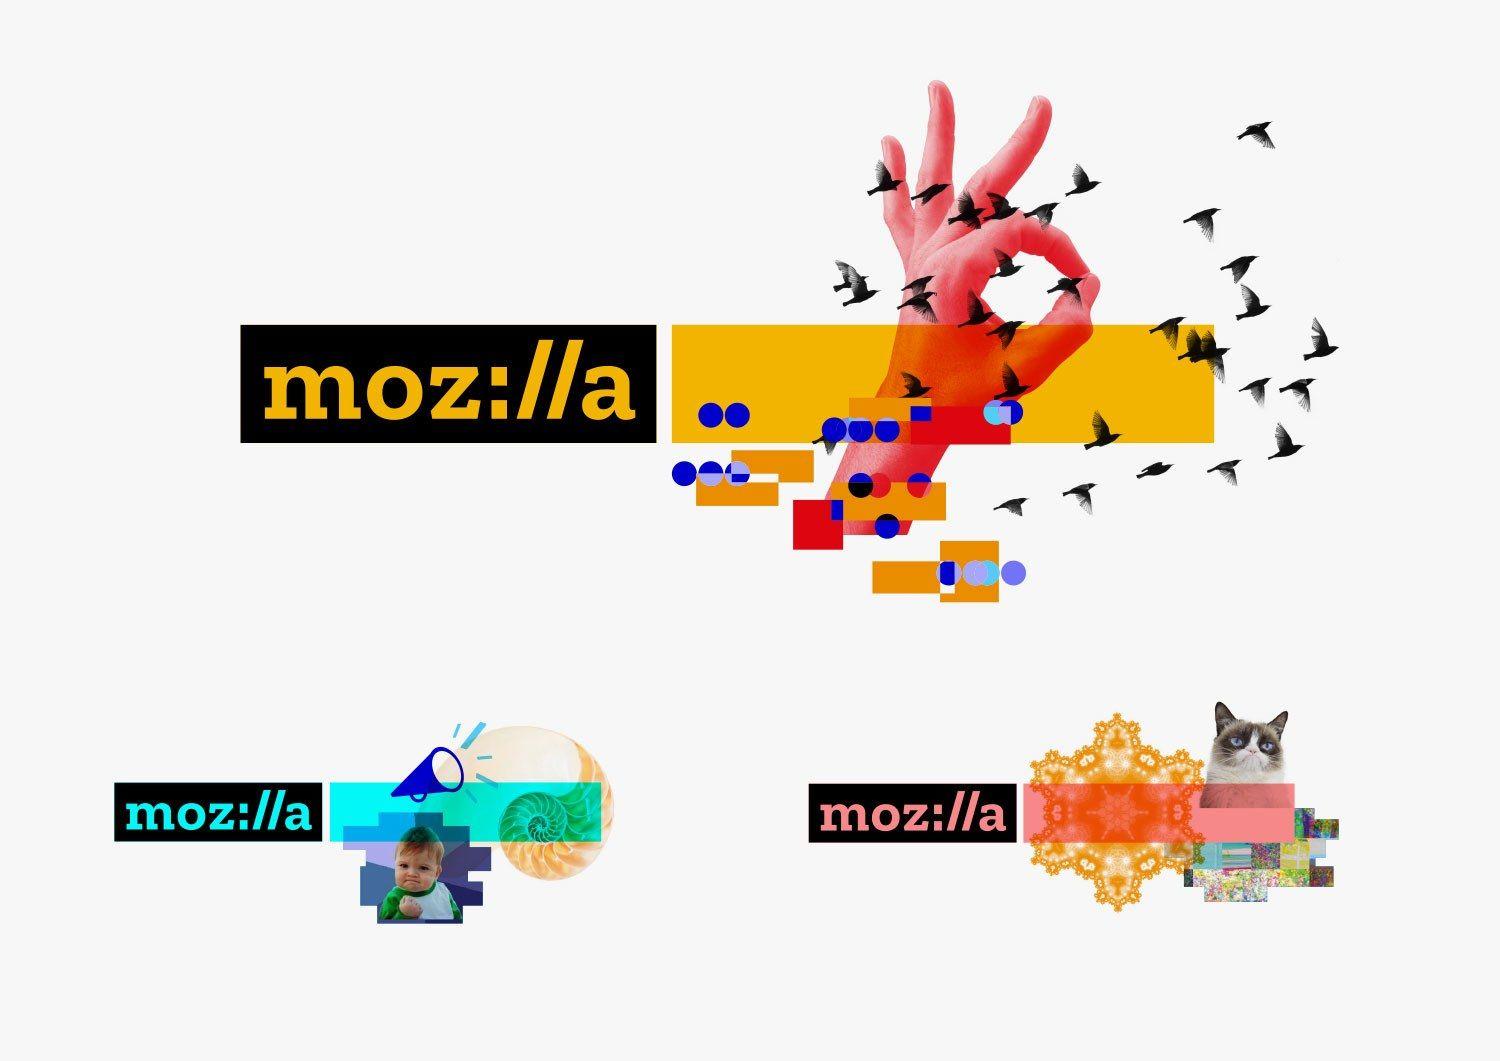 New Process Logo - Introducing Mozilla's New Logo, Moz://a. Get It? | WIRED